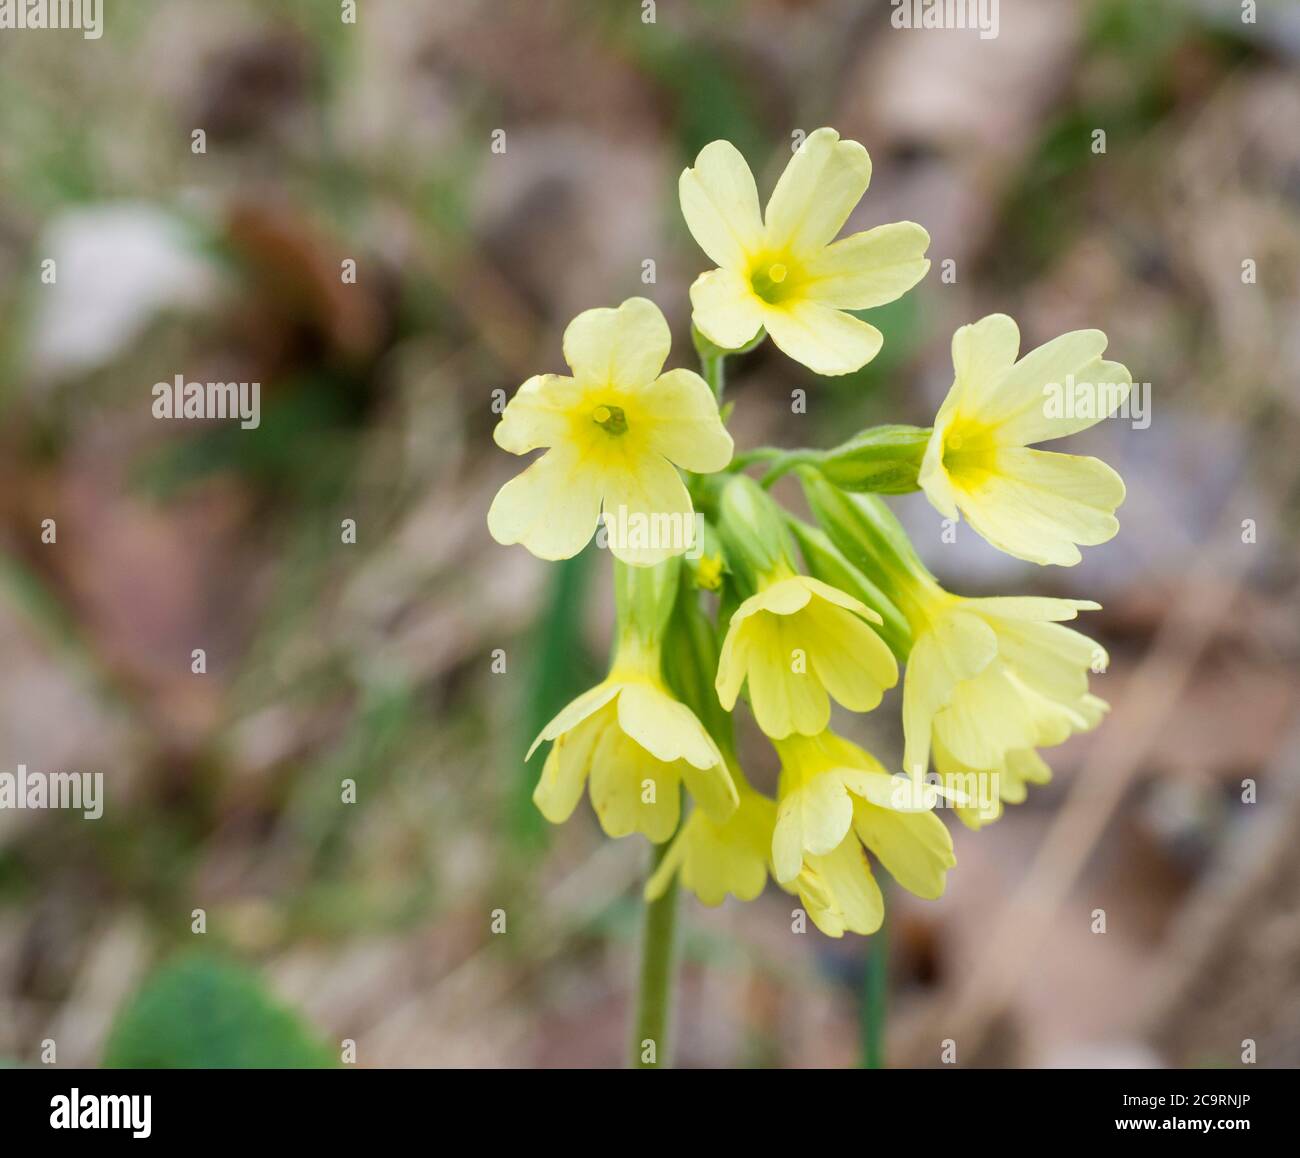 close up yellow primrose Primula vulgaris flowers in grass, spring floral background, selective focus Stock Photo